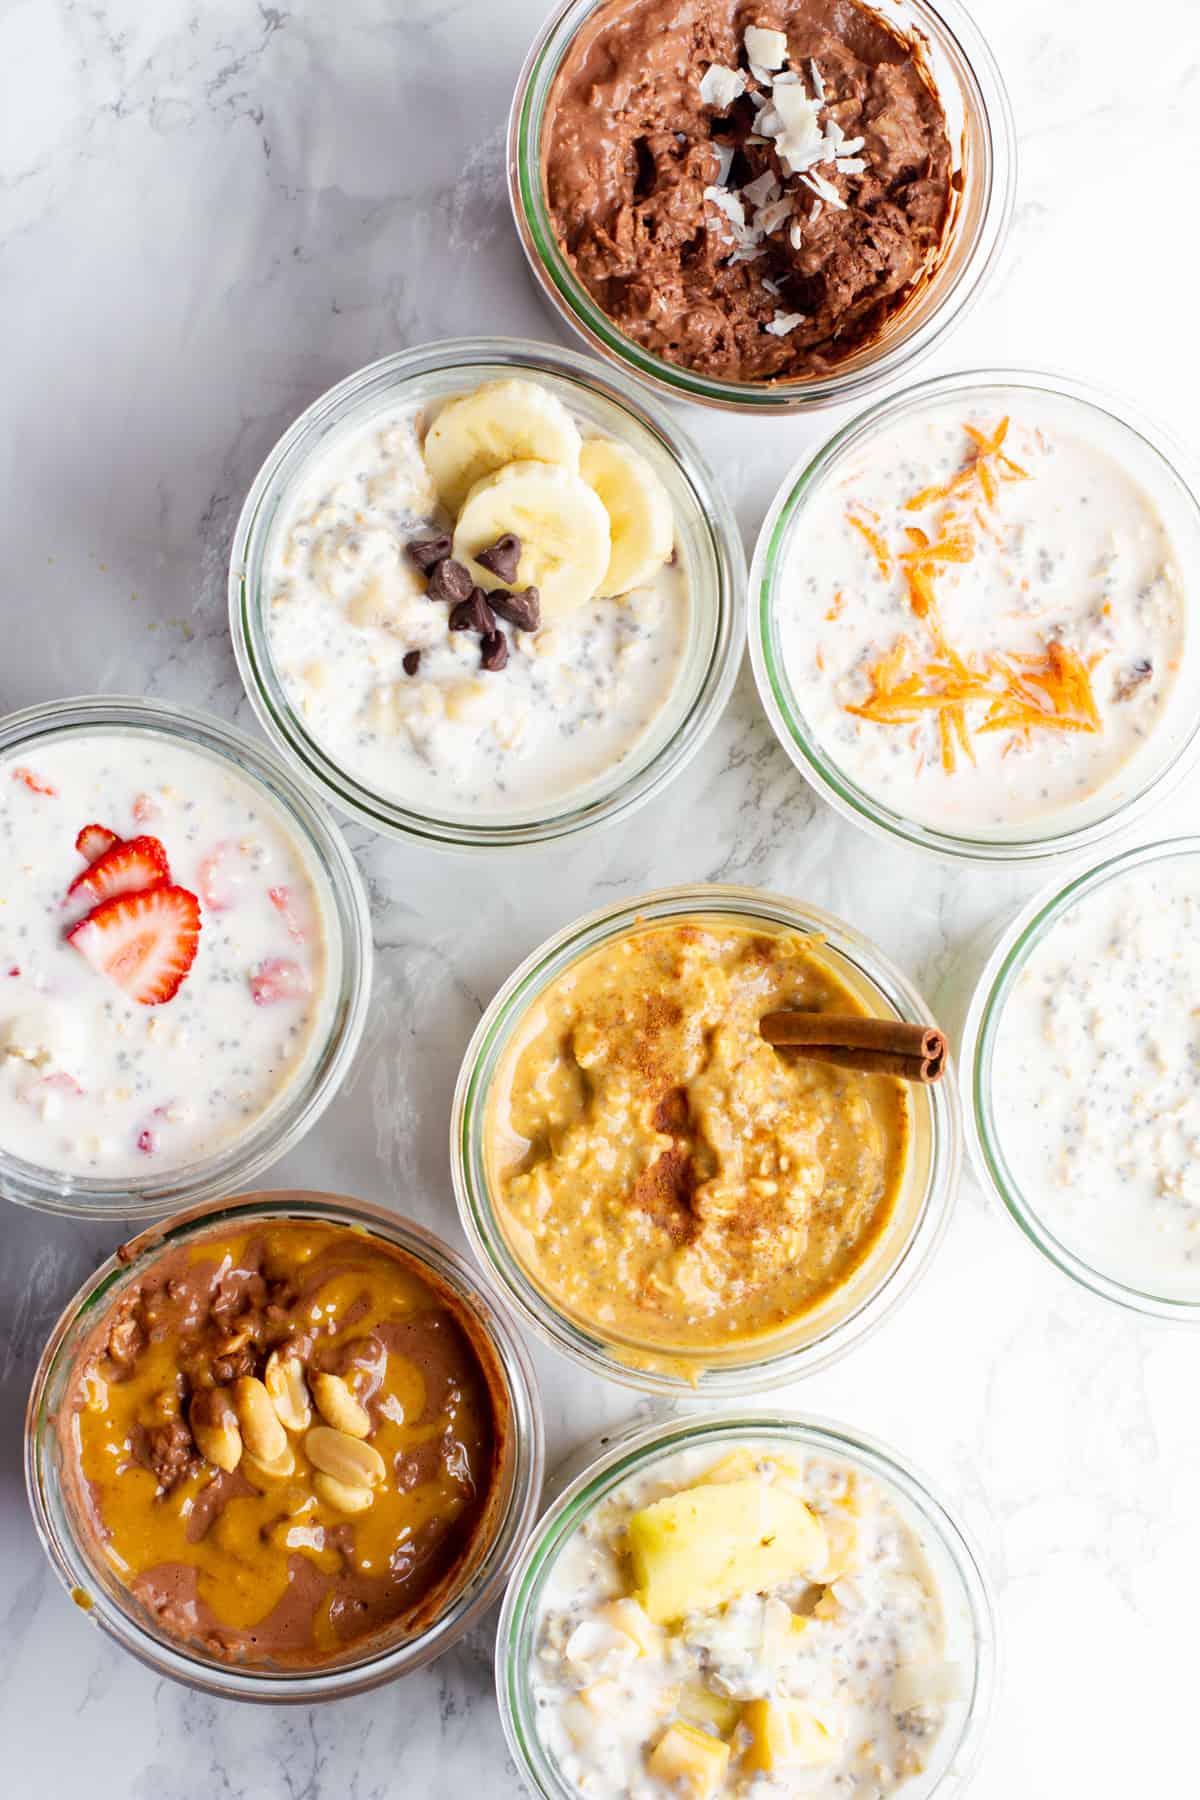 How to Make Overnight Oats (Plus 15 Easy and Delicious Overnight Oatmeal Recipes)